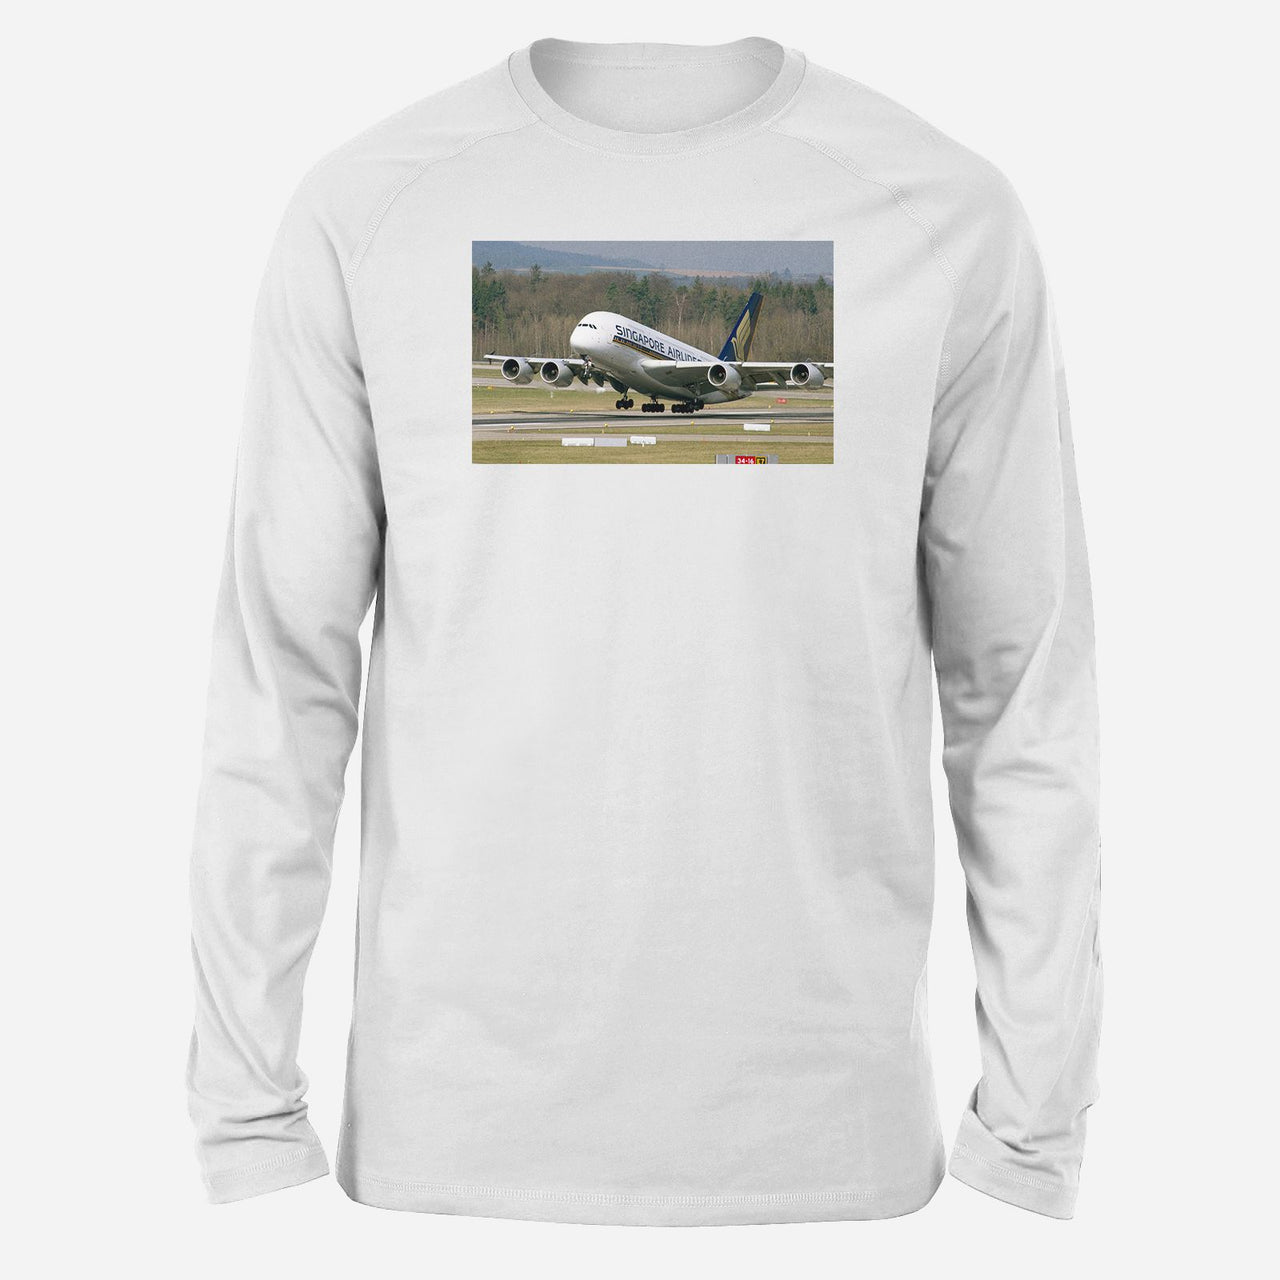 Departing Singapore Airlines A380 Designed Long-Sleeve T-Shirts